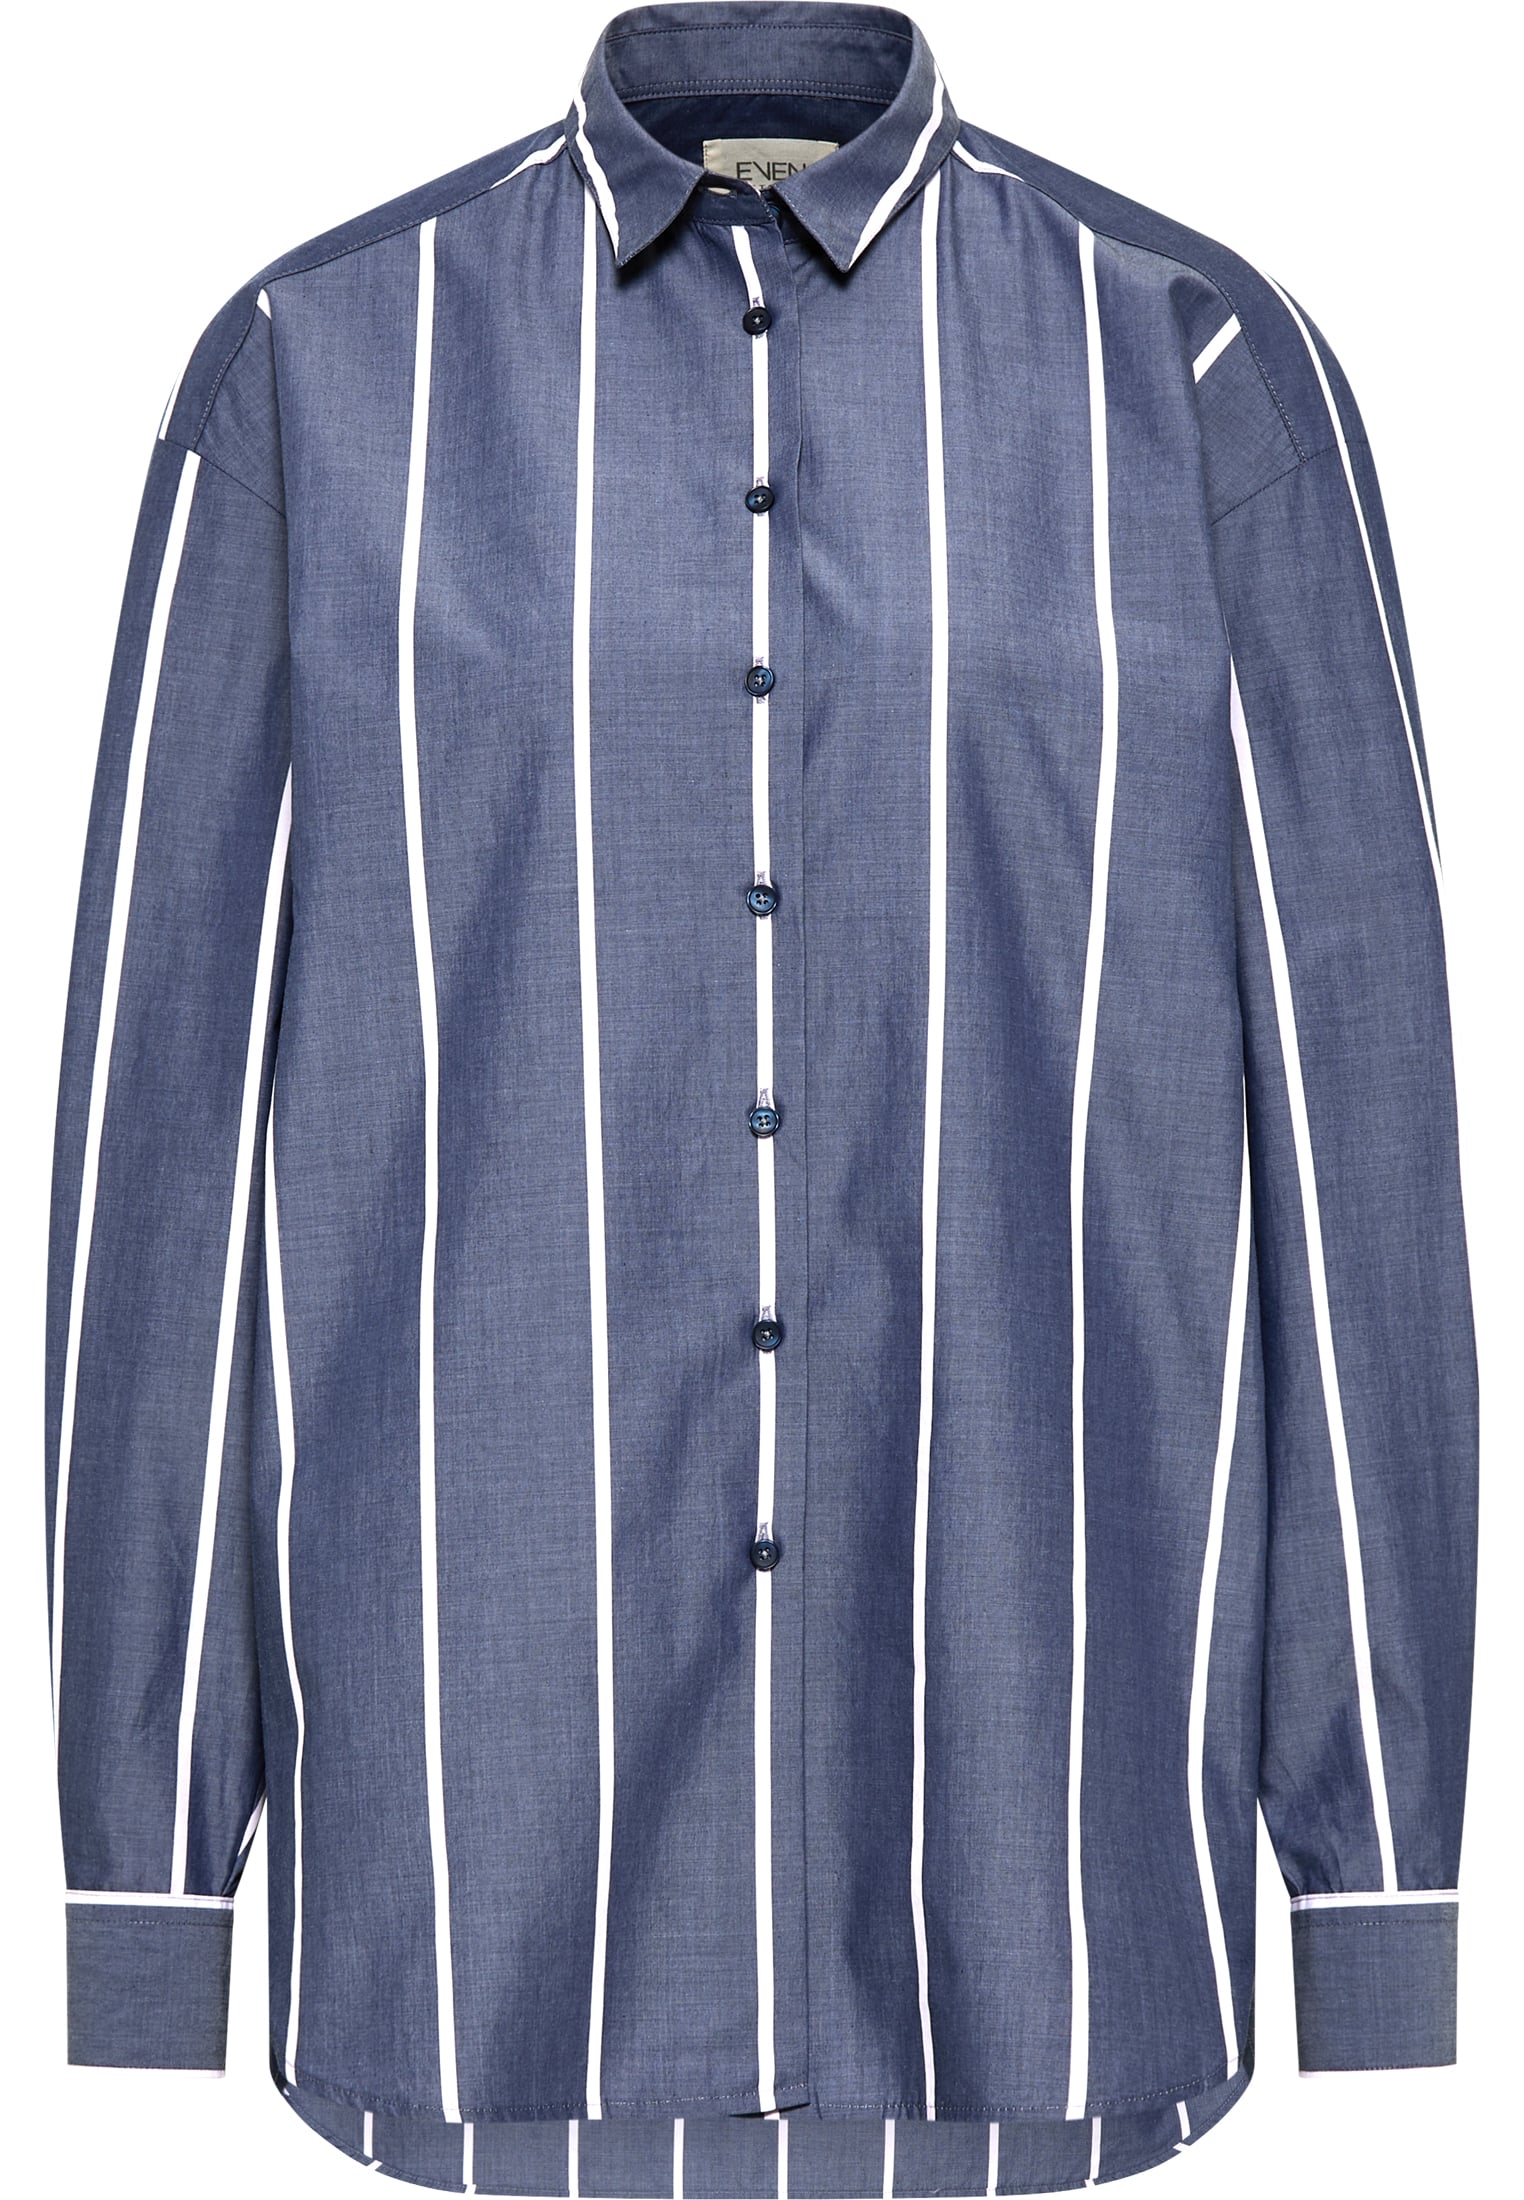 Blouse in navy striped